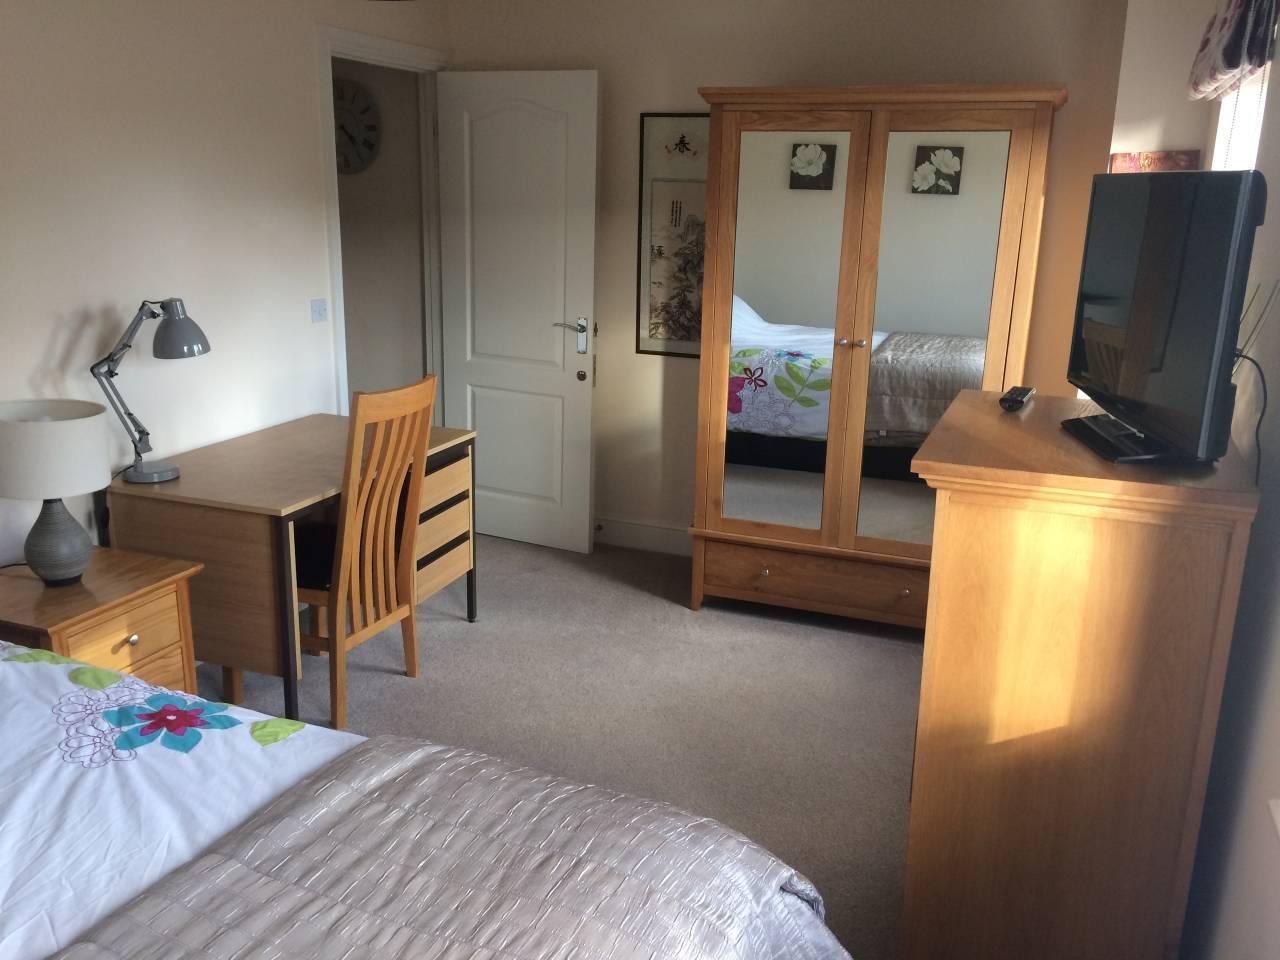 Picture of my guest bedroom that I rent out on Airbnb in Norwich, Norfolk